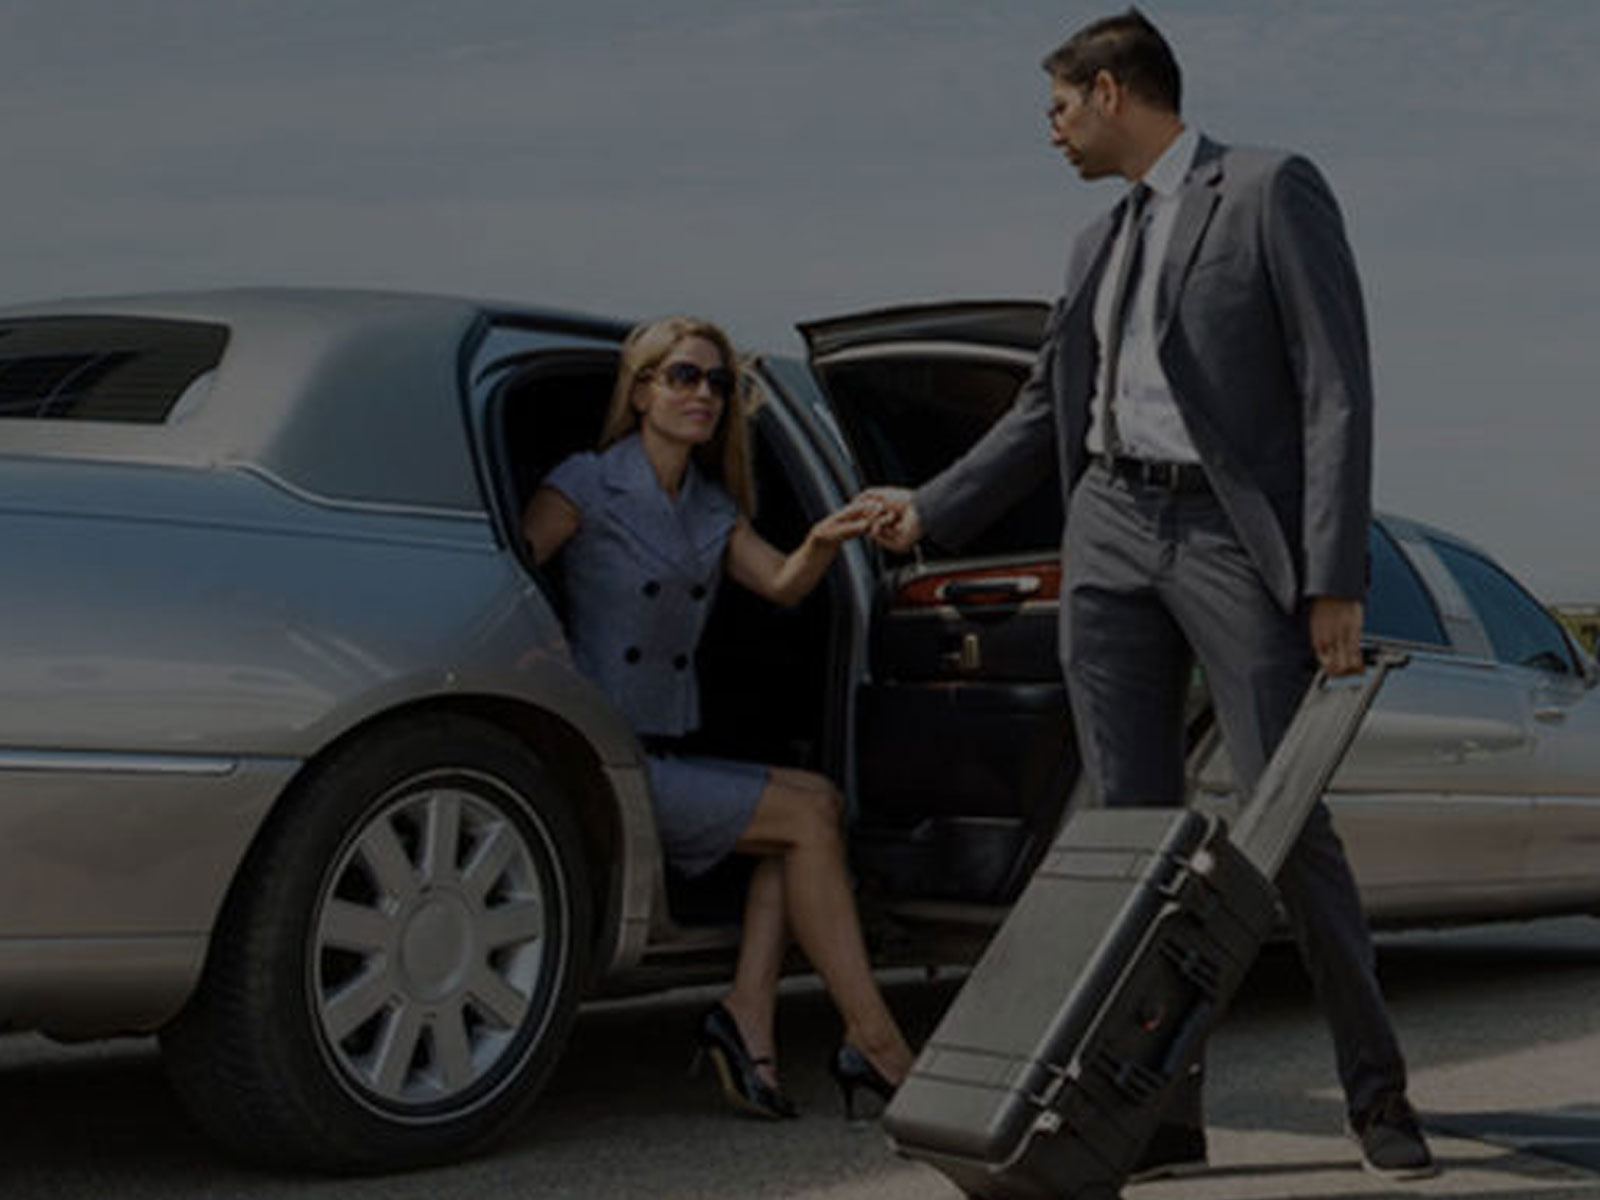 limousine service in barrie ontario black tie executive limo